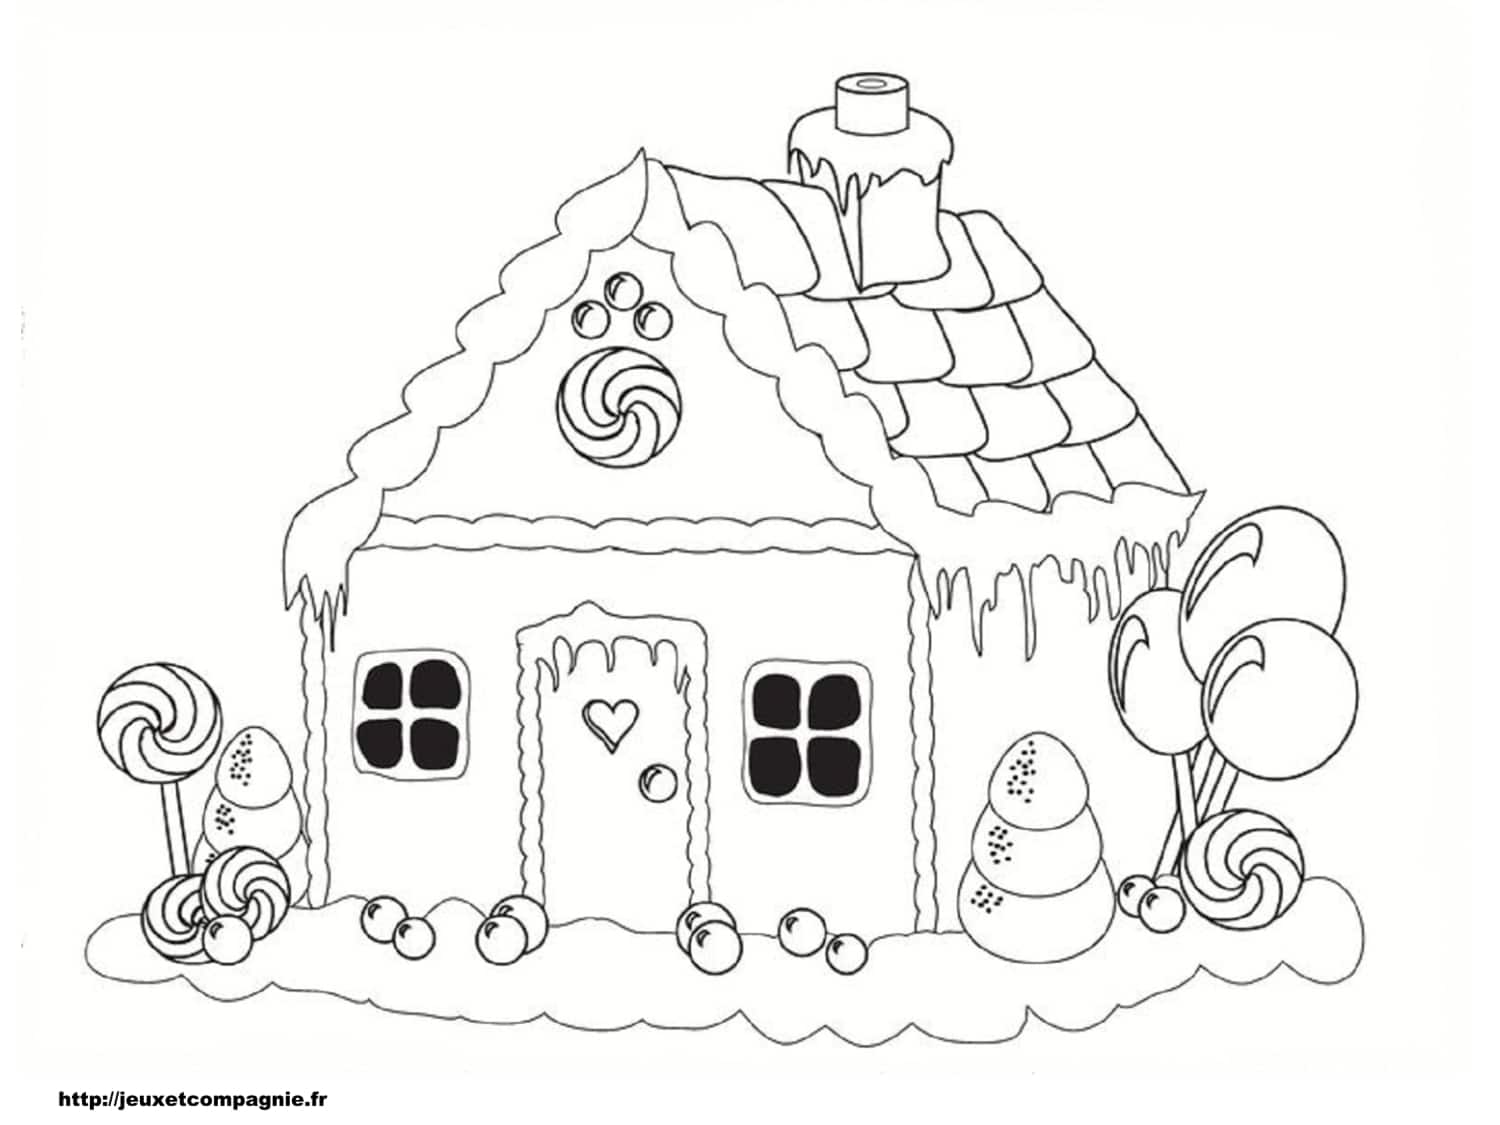 Hansel and Gretel coloring page of Hansel in a cage Safety Pinterest